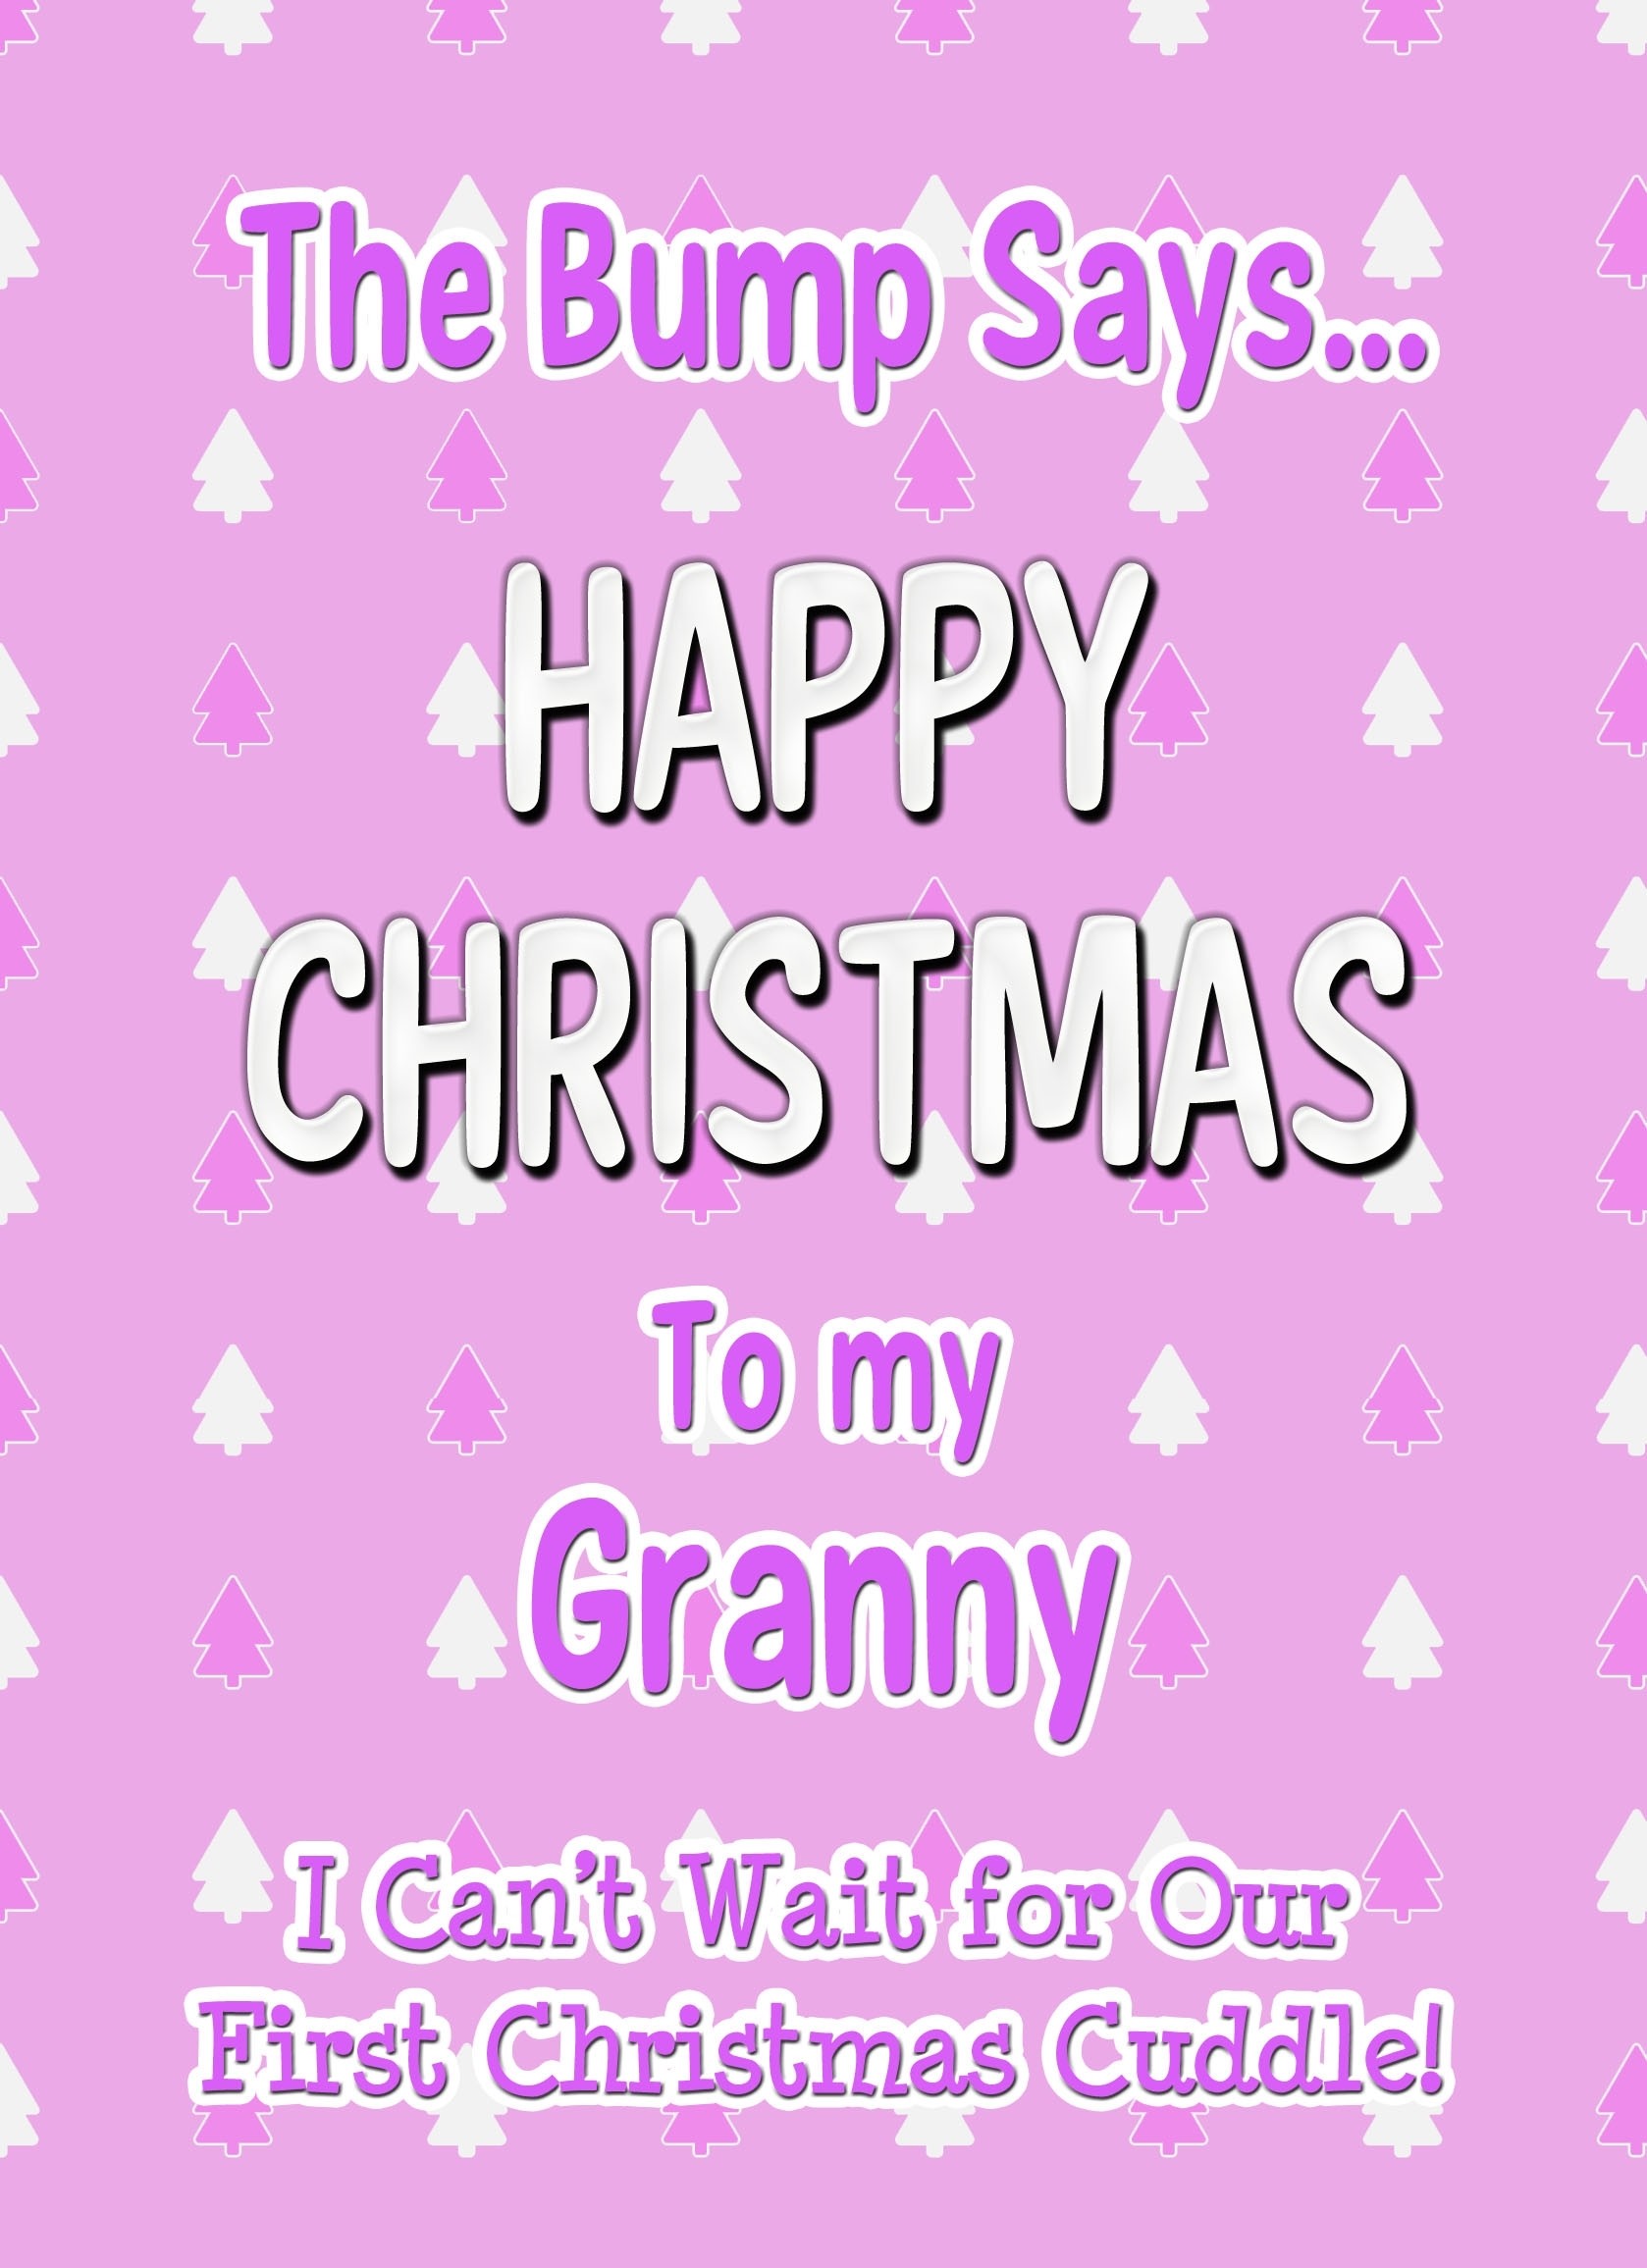 From The Bump Pregnancy Christmas Card (Granny, Pink)